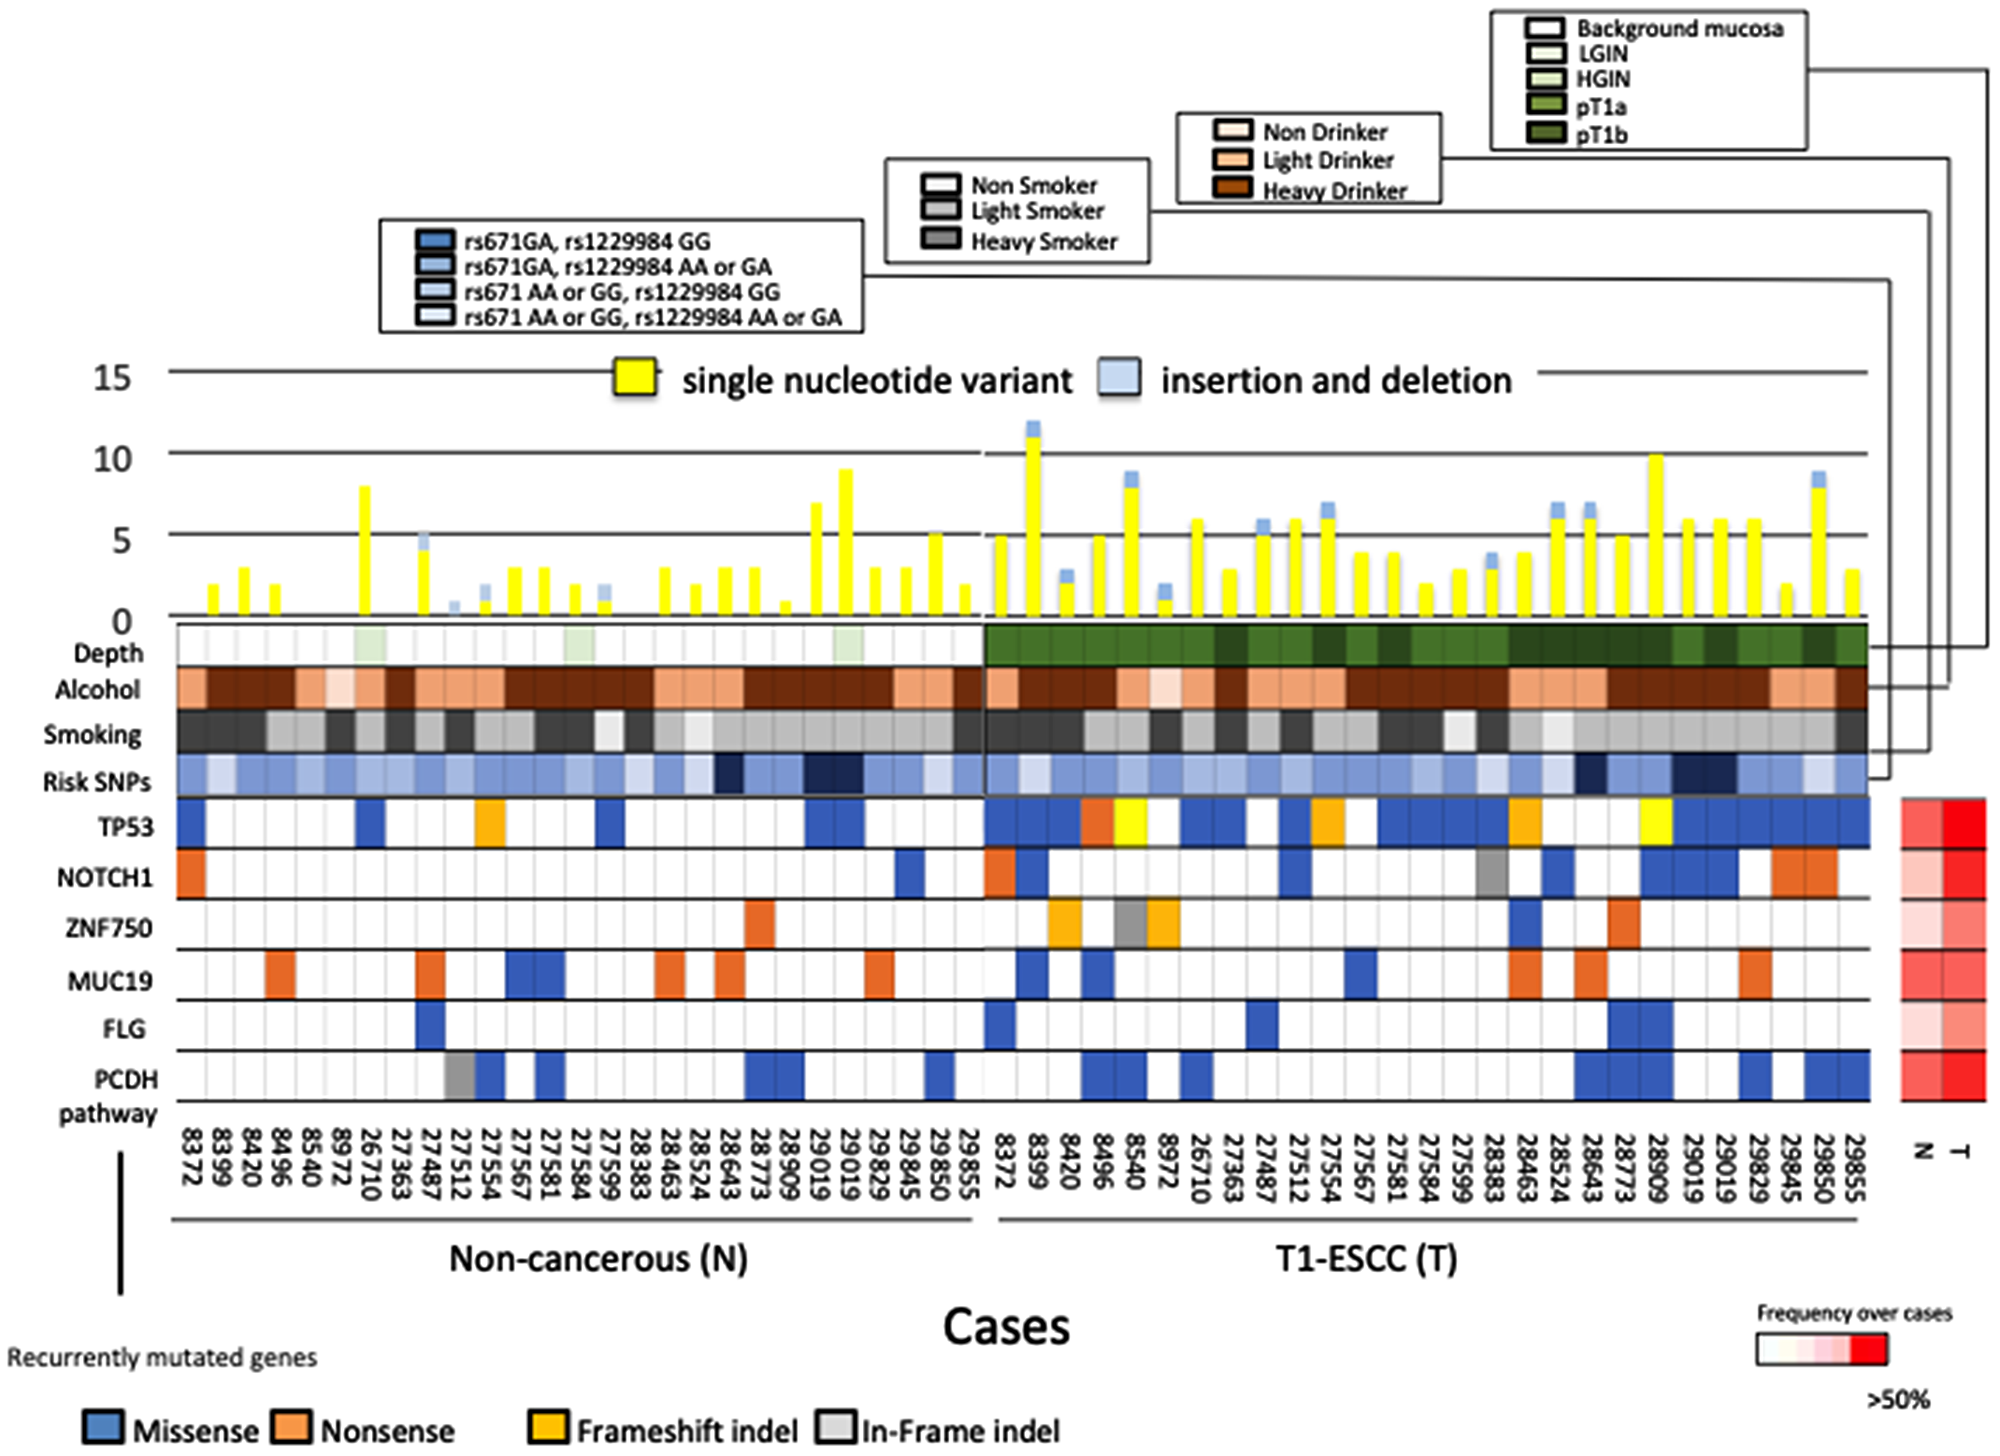 Mutational landscapes in carcinoma tissues and non-cancerous tissues of 26 ESCC patients.